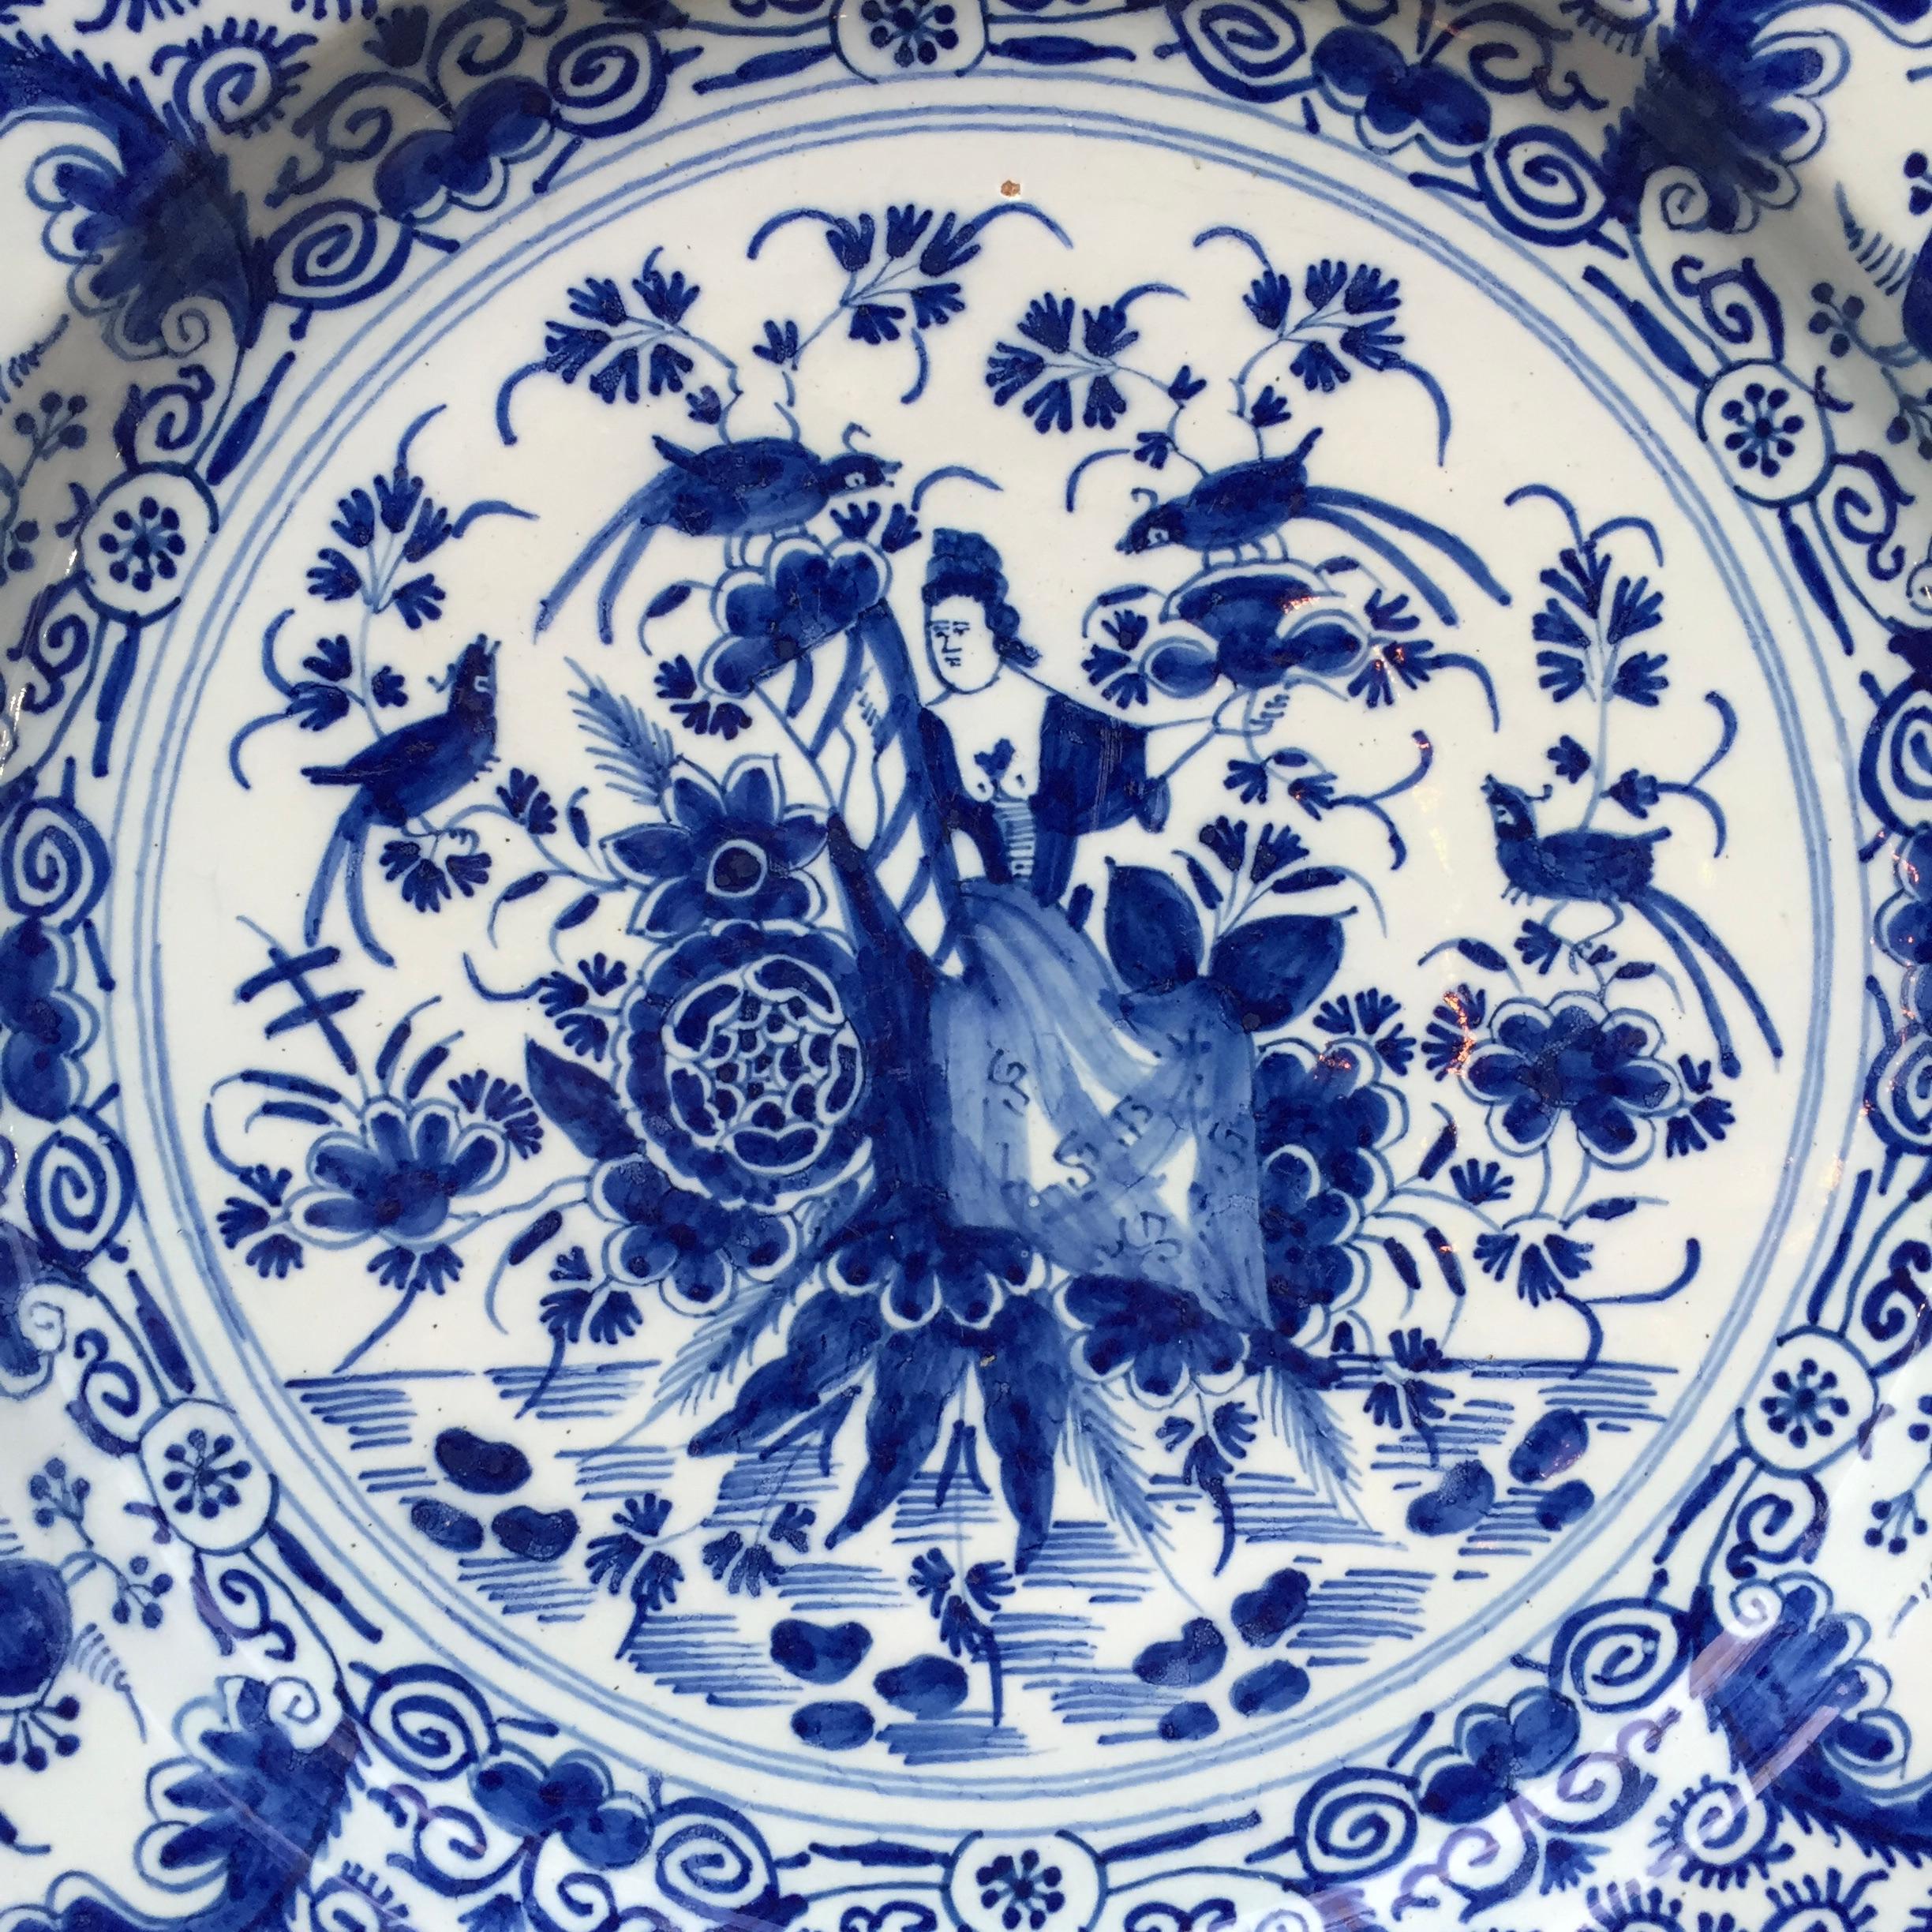 City: Delft
Workshop: De proceleyne Bijl (The porcelain Axe)
Date: circa 1730 - 1760

A fine blue and white plate with decoration of the Lady Fortune, holding a cornucopia, seated in a Garden with flowers and birds.
Painted in a wonderful and